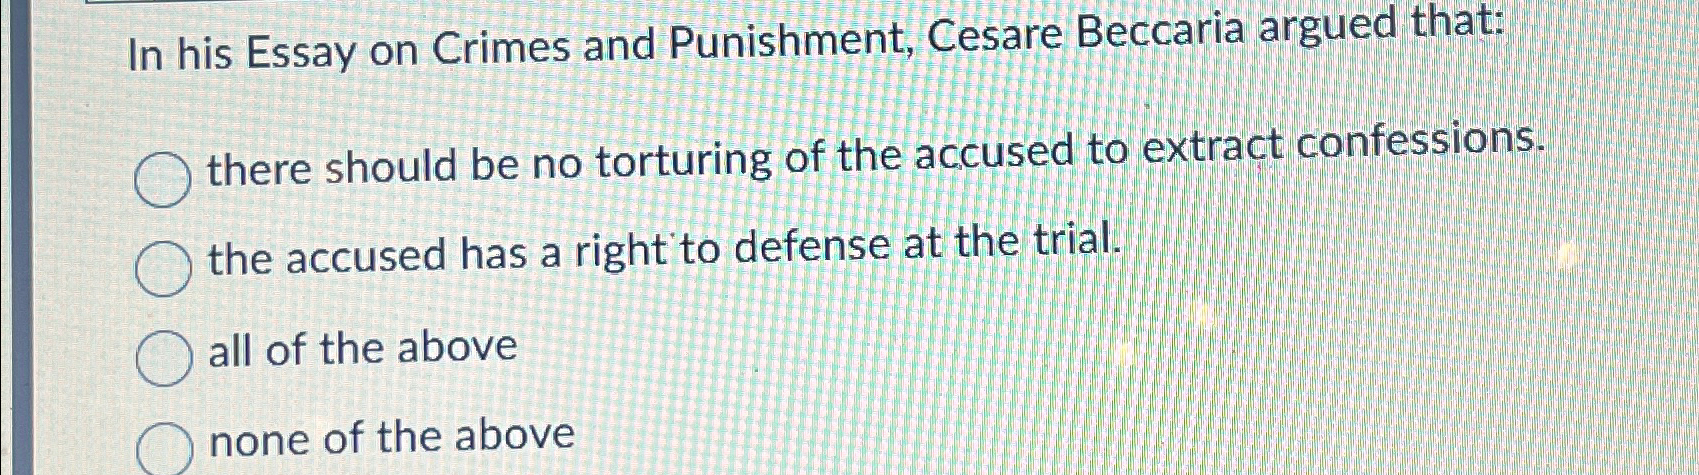 essay on crimes and punishment by beccaria